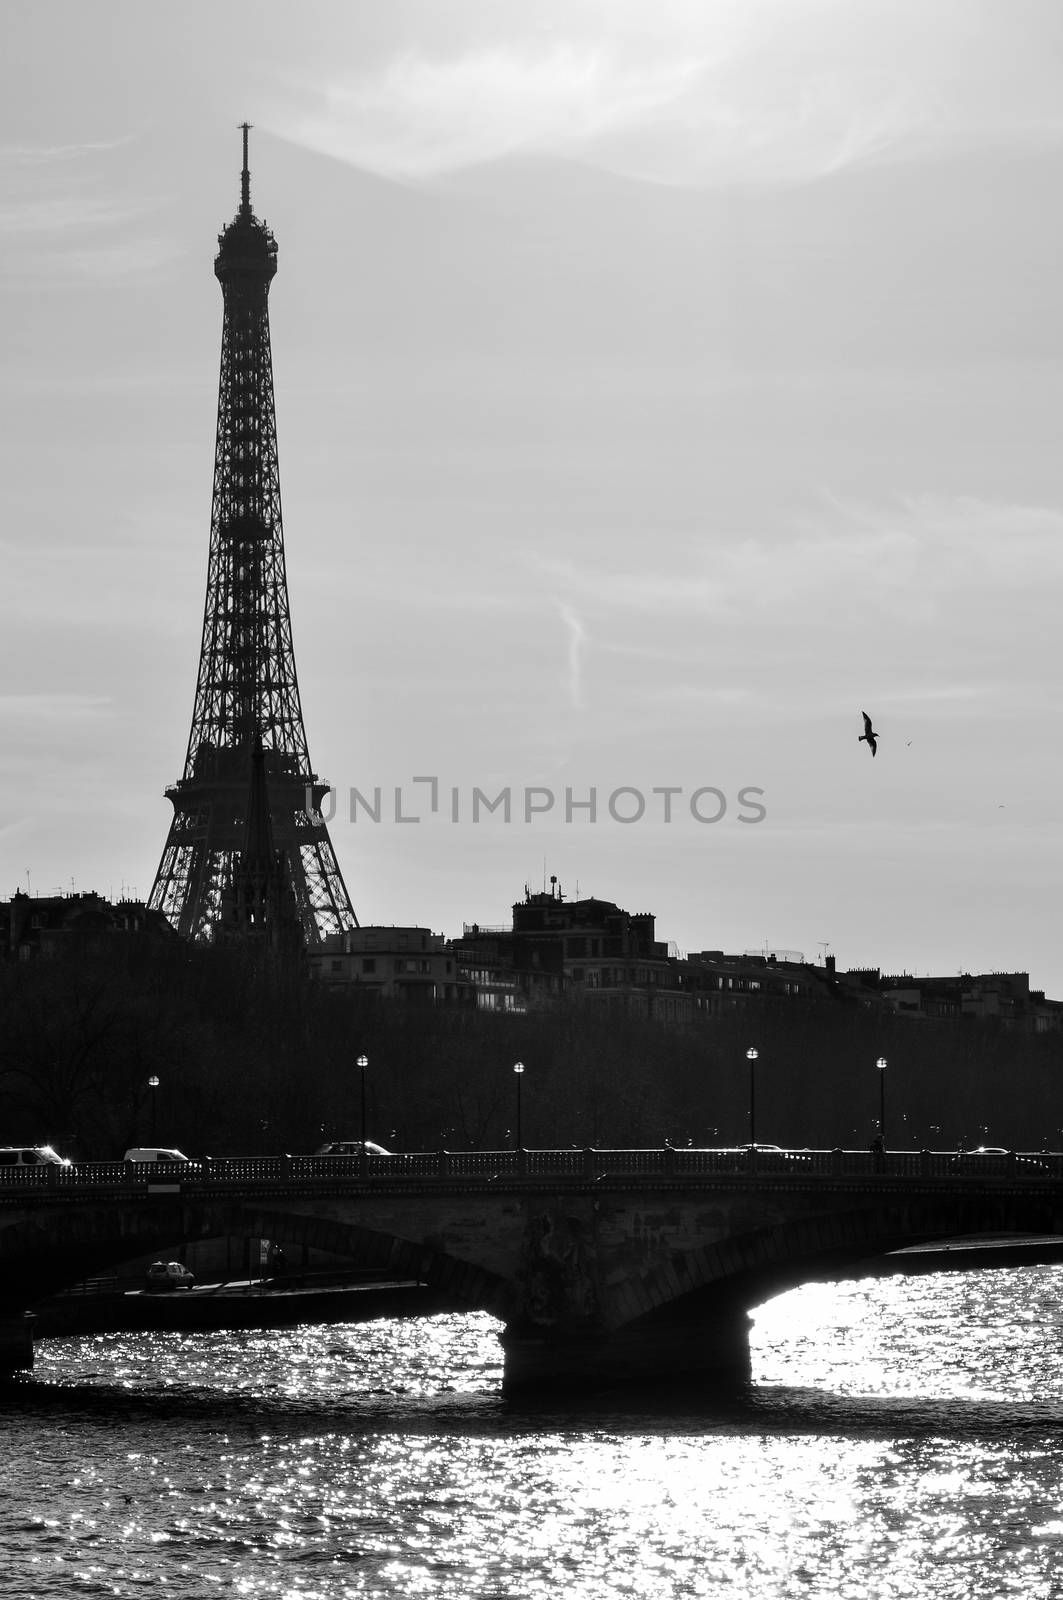 The Eiffel Tower in black and white by dutourdumonde